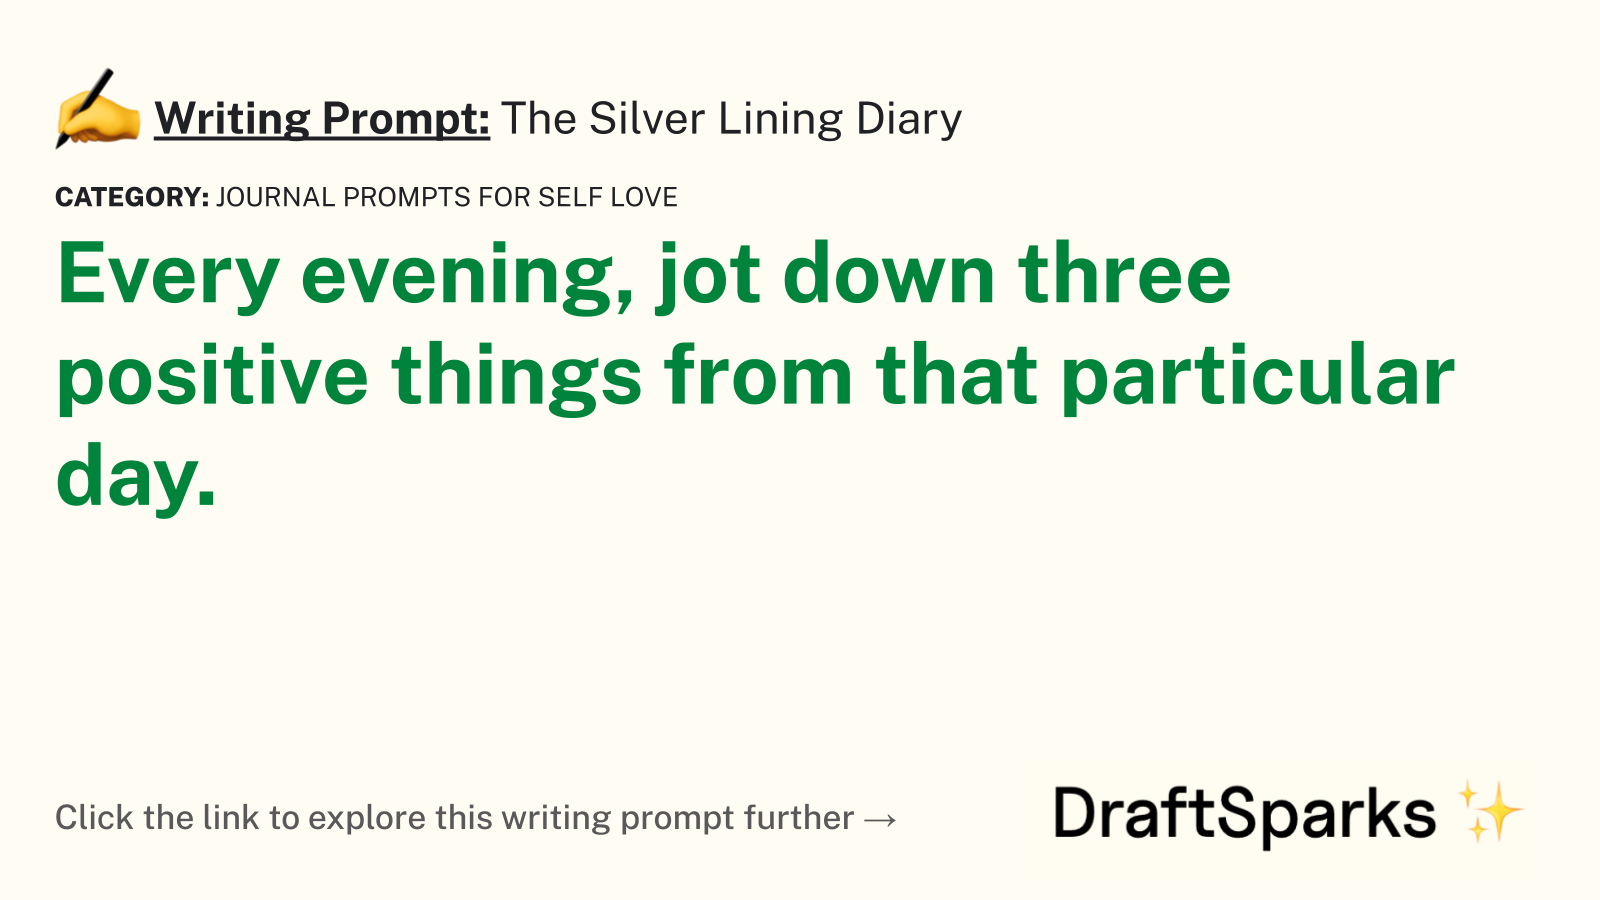 The Silver Lining Diary